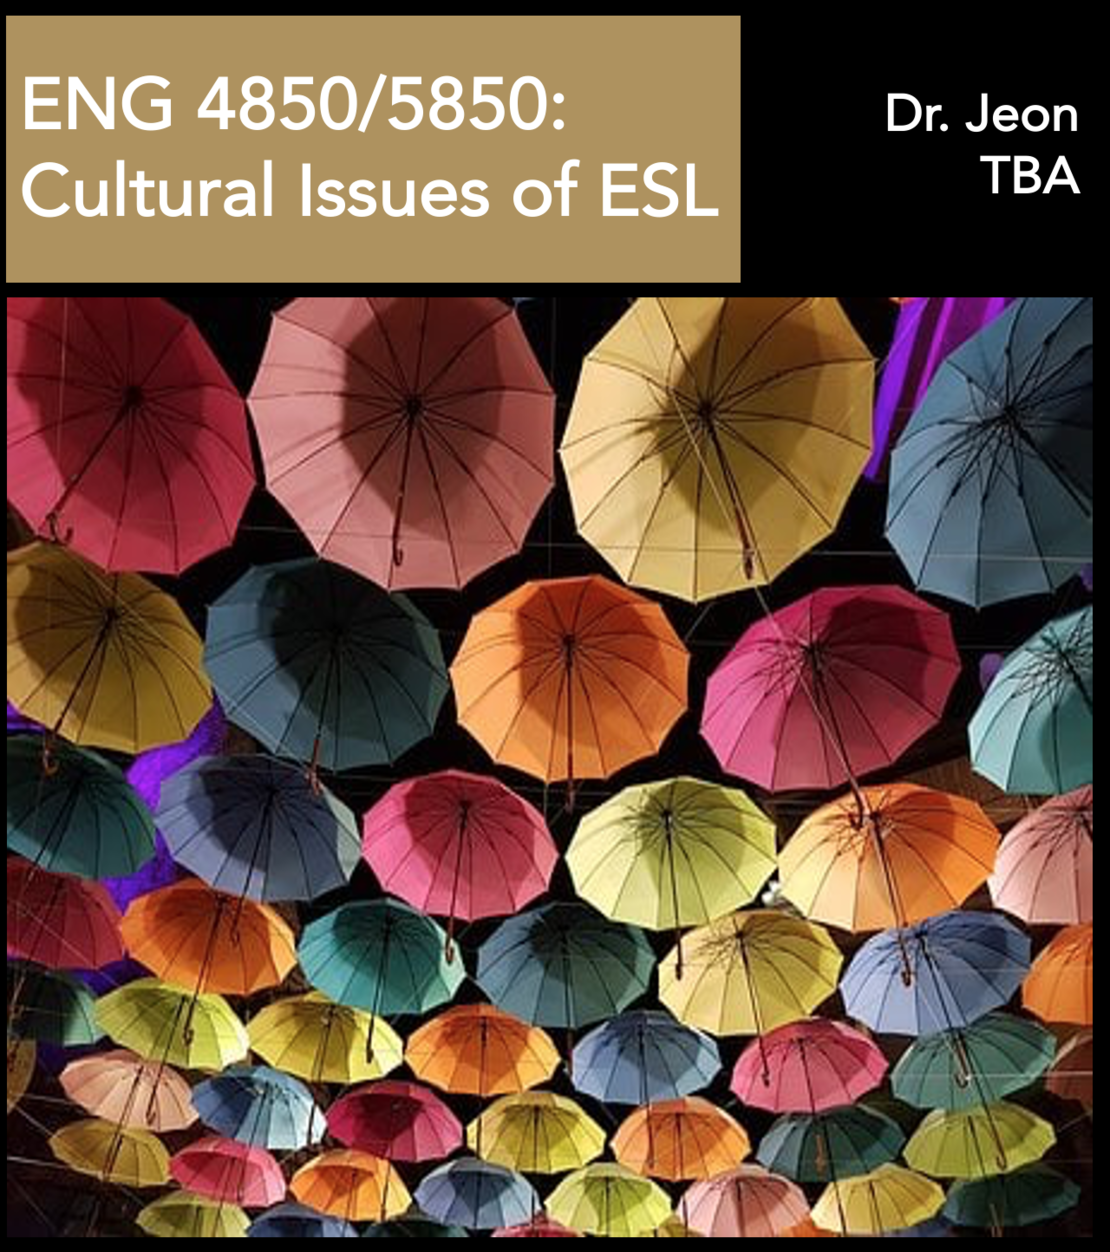 ENG 4850/5850: Cultural Issues of ESL Dr. Jeon TBA